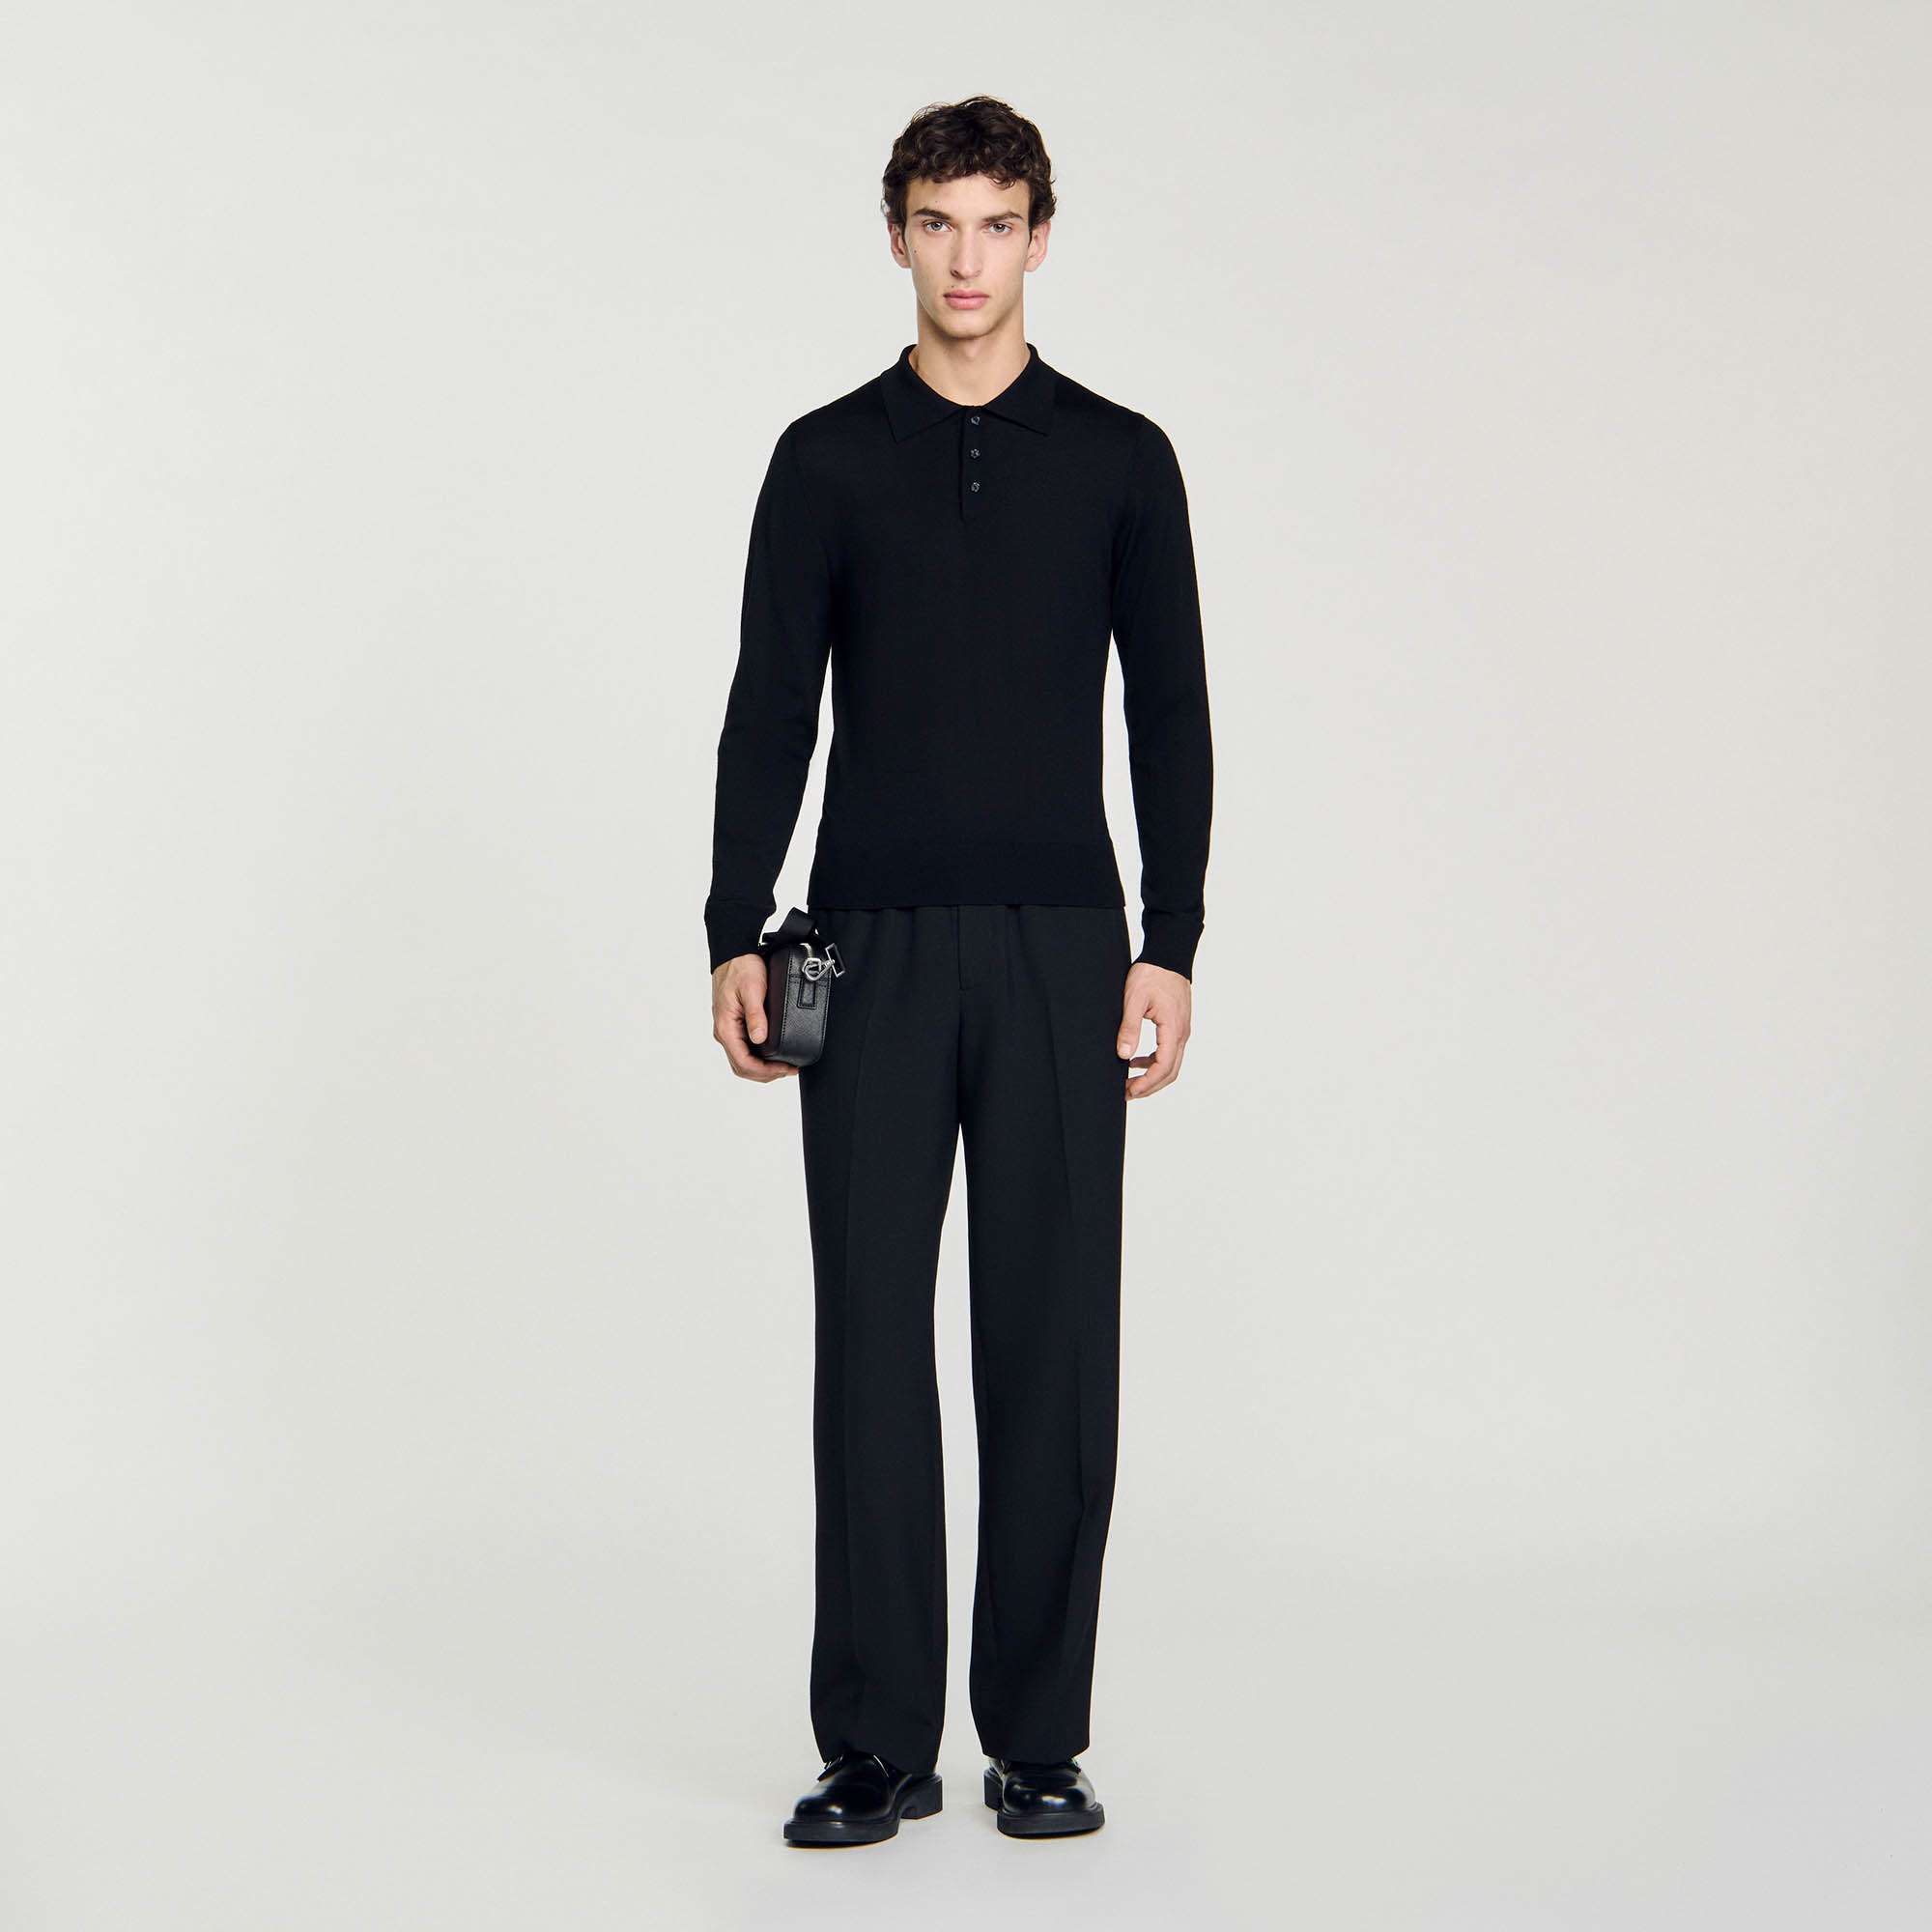 Sandro wool Collar: Fine knit polo shirt with button-down polo shirt neck and long sleeves